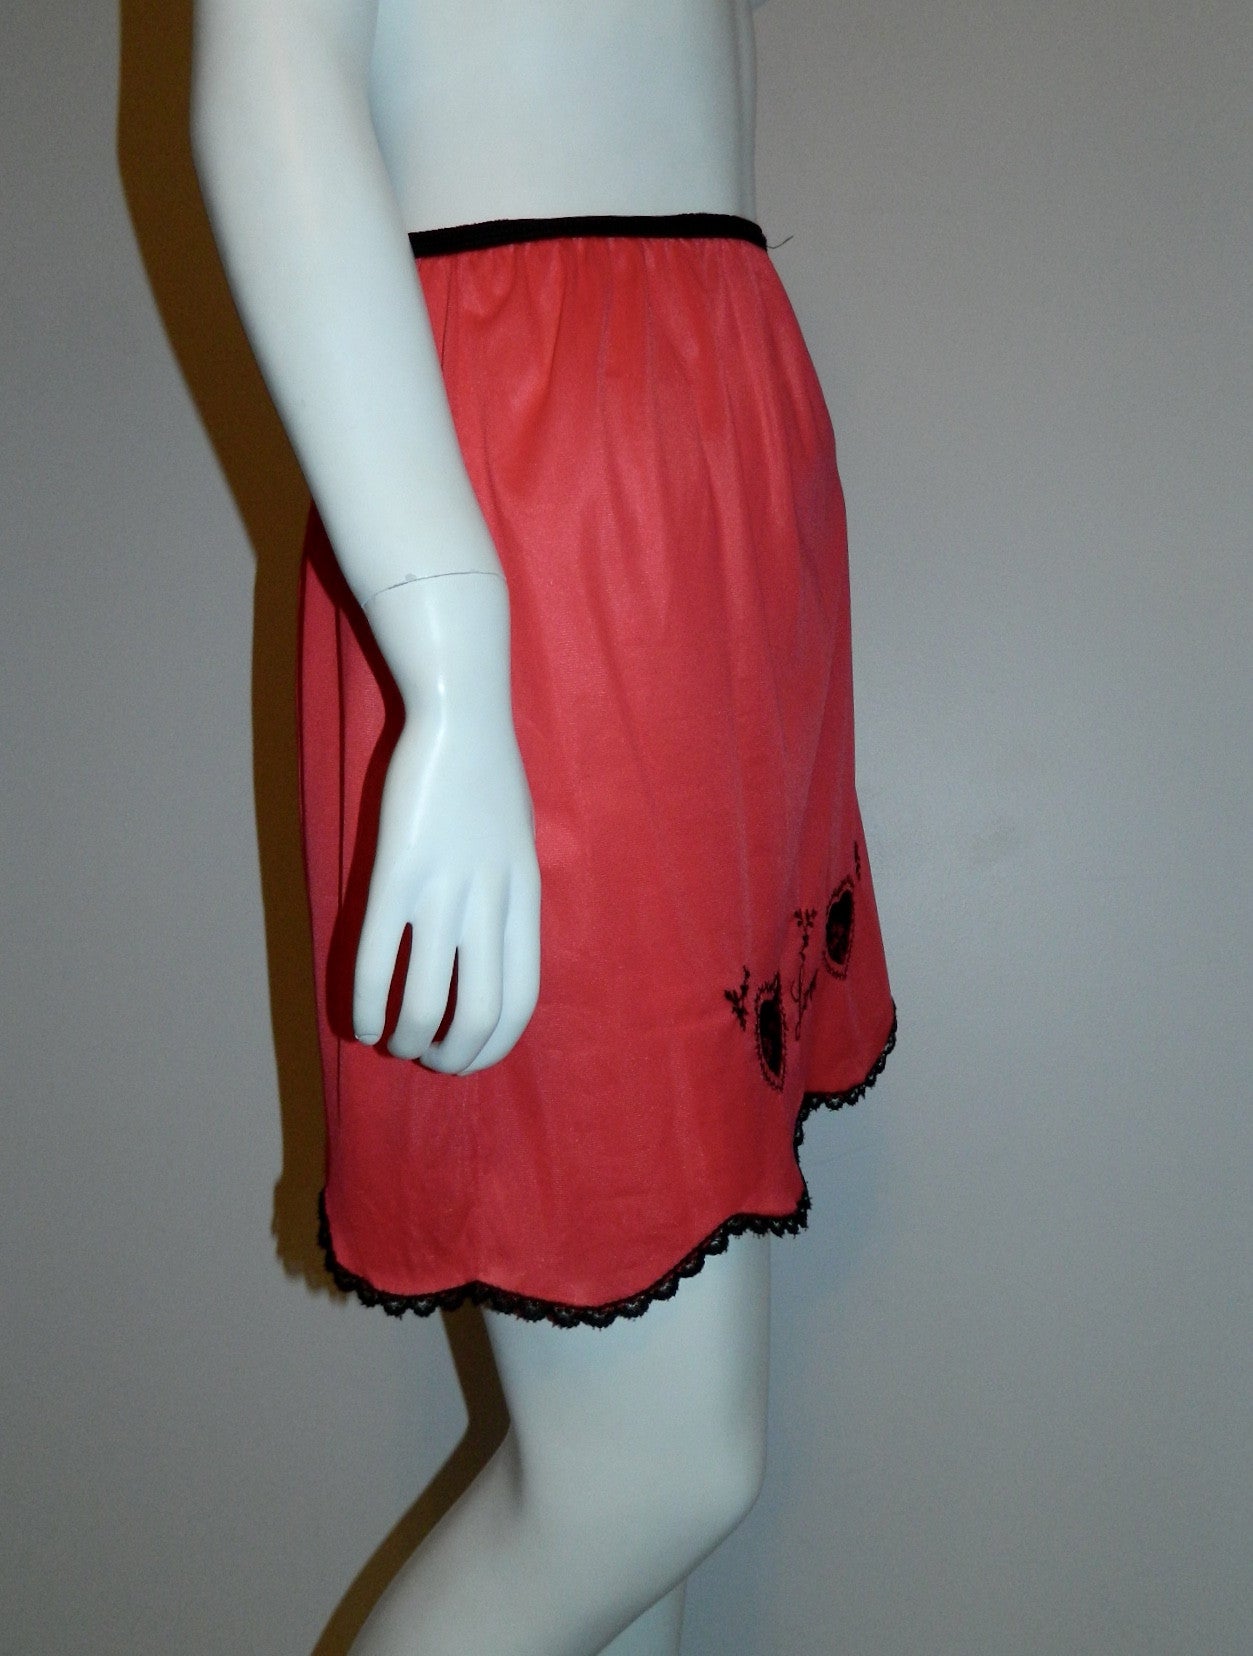 vintage 1960s half slip / red LOVE skirt black lace embroidery S - M